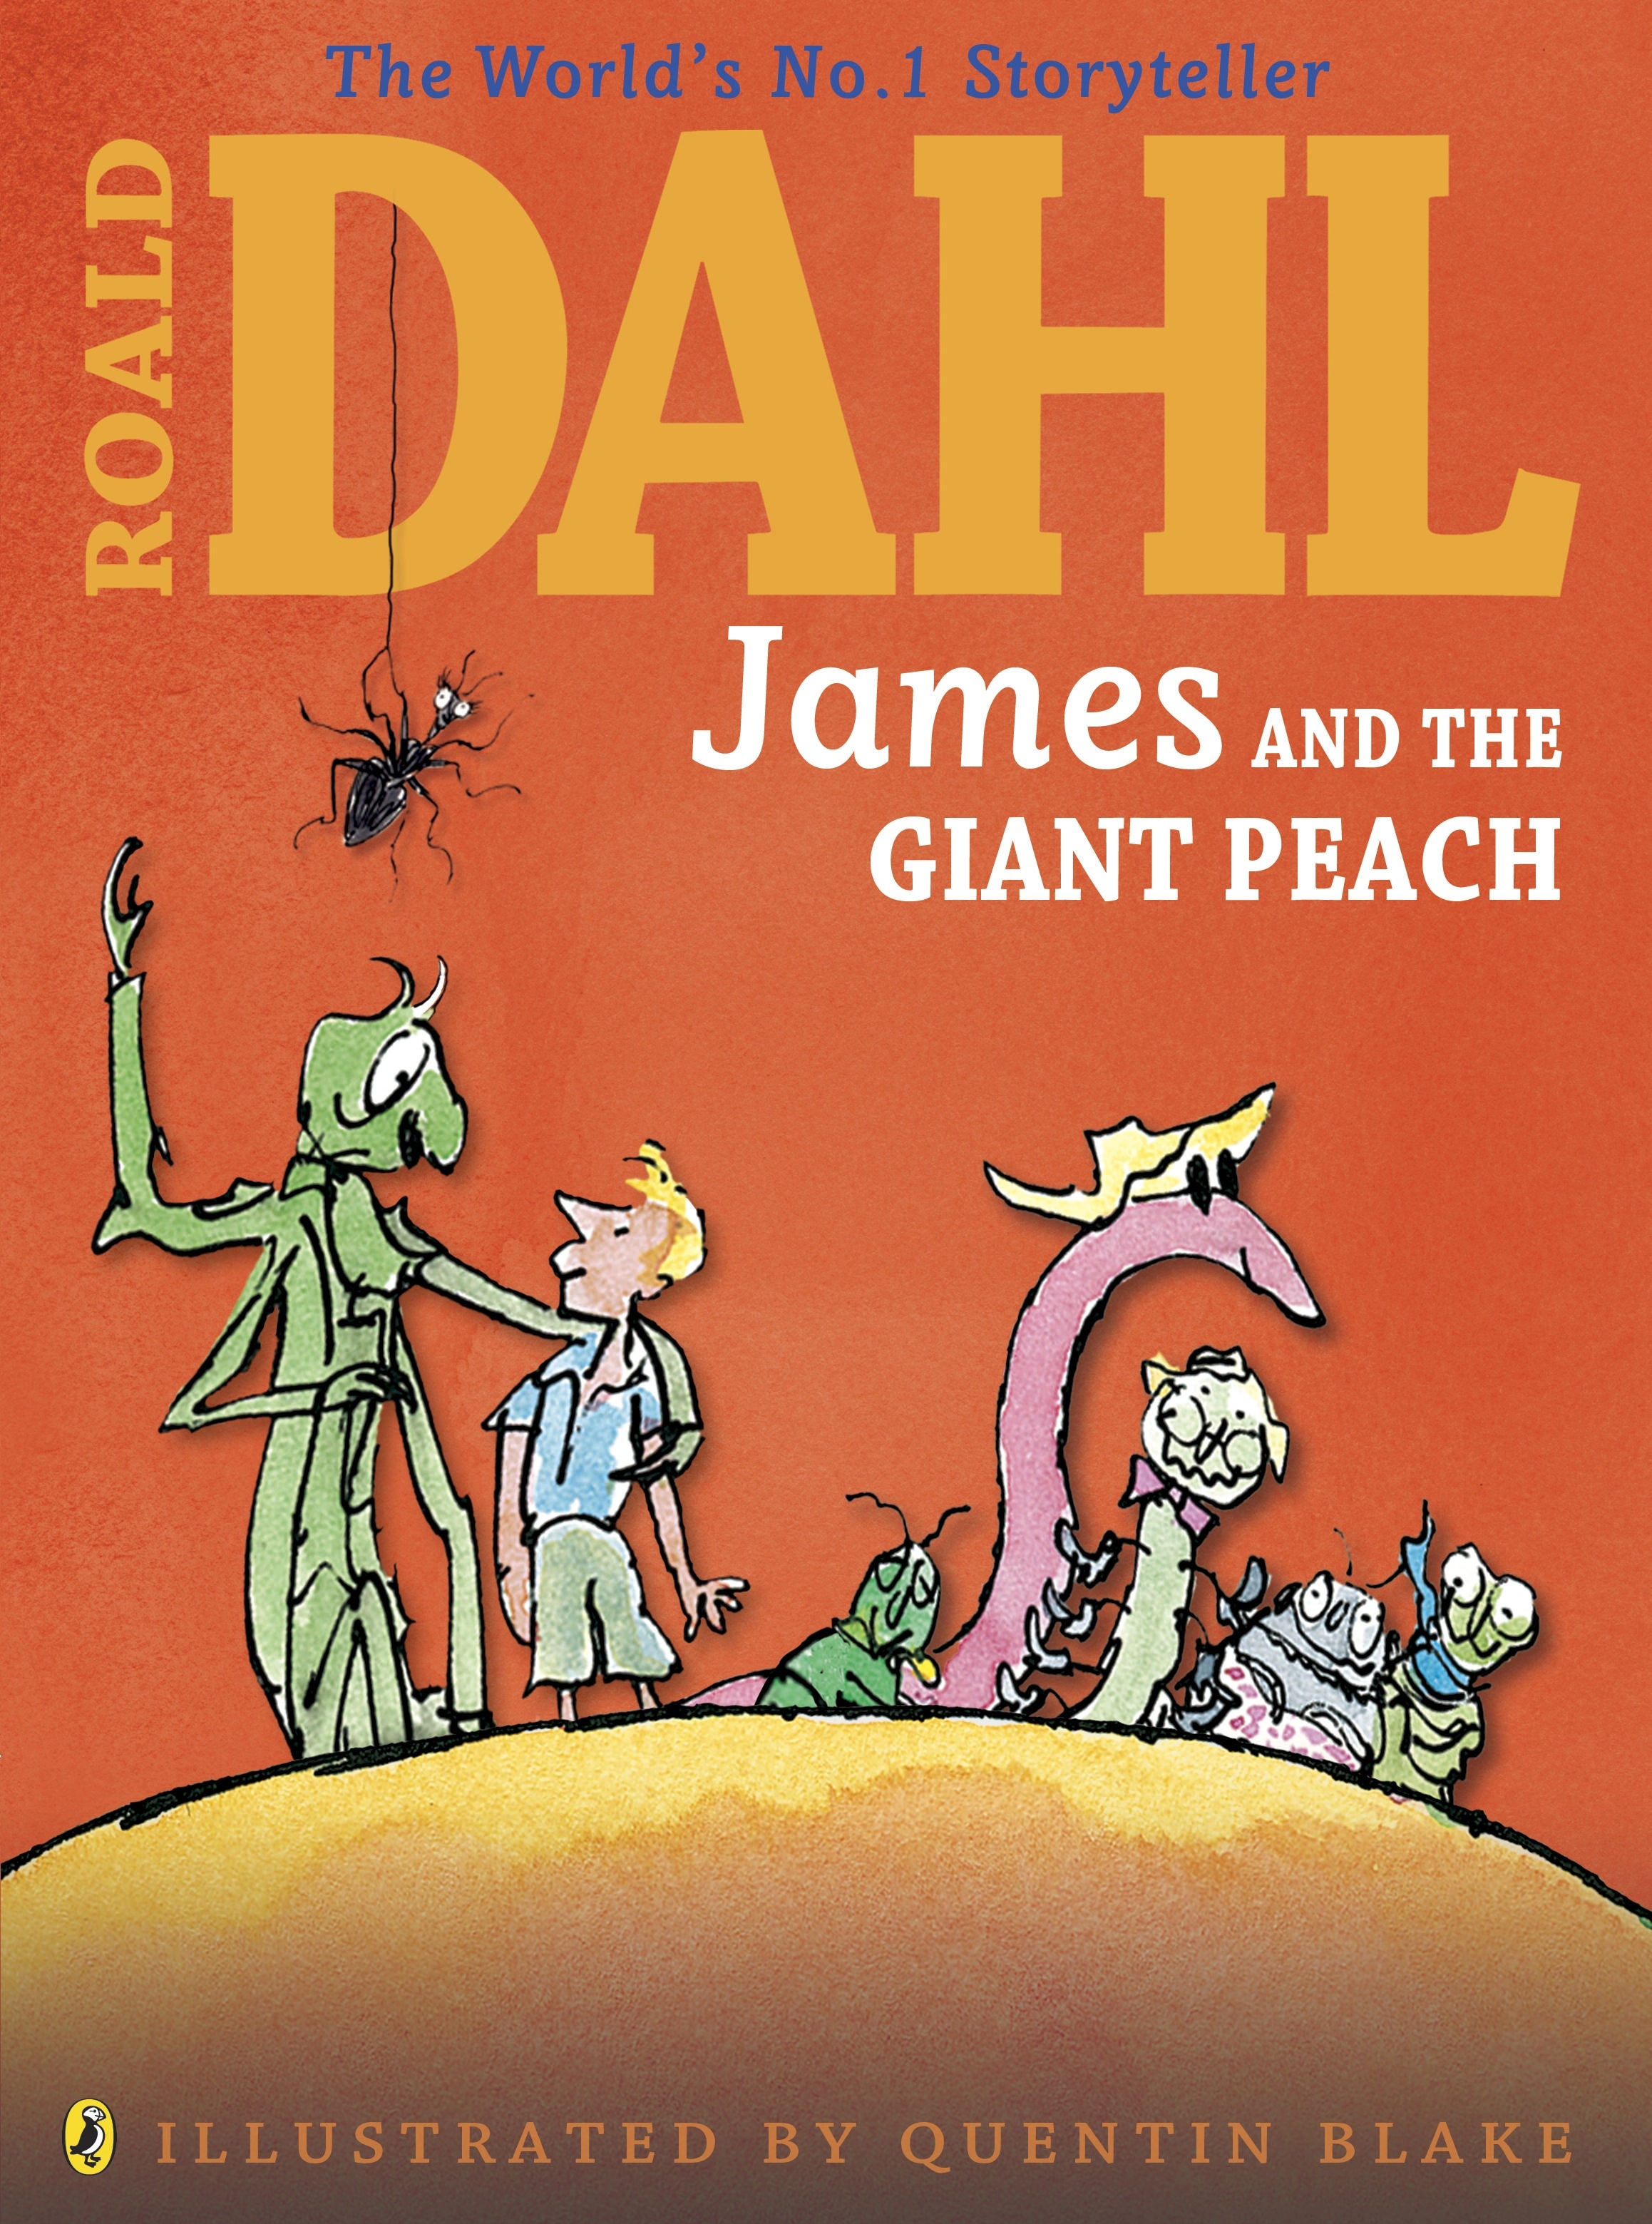 James and the Giant Peach By Roald Dahl (Illustrated Edition)